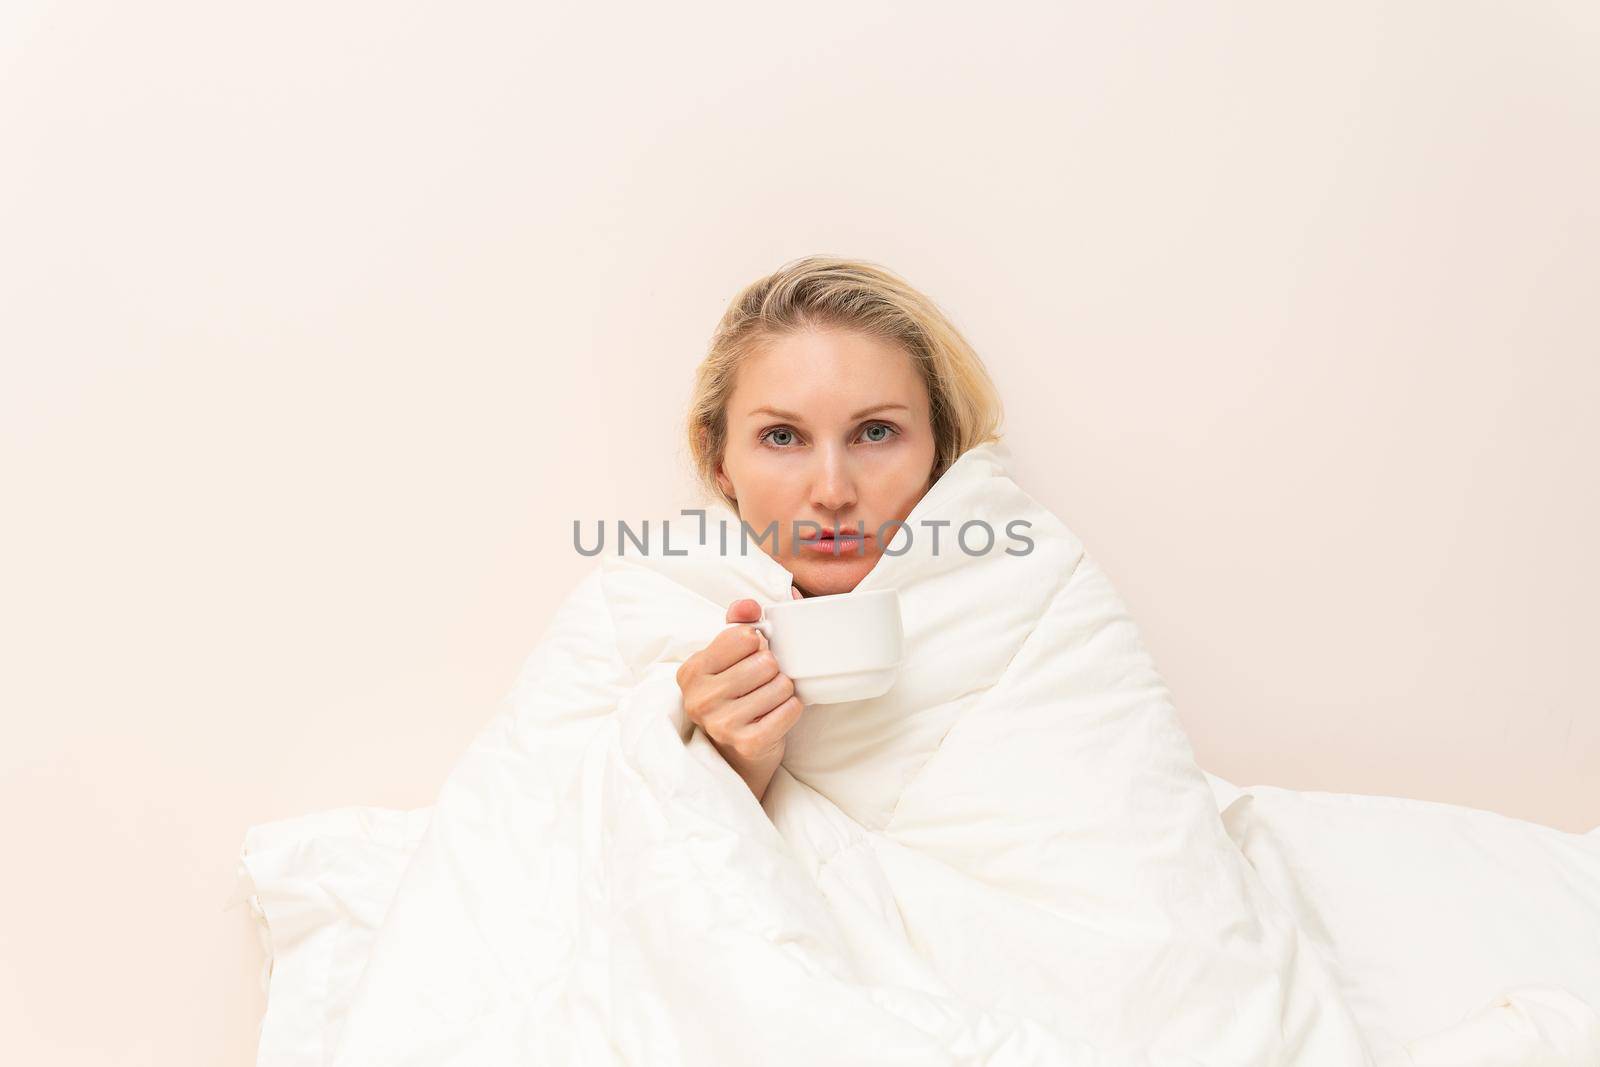 Cold coffee beauty cell bed blanket spa copyspace bathrobe body, for ritual white in modern from relax towel, lifestyle healthy. Dressing interior therapy, by 89167702191